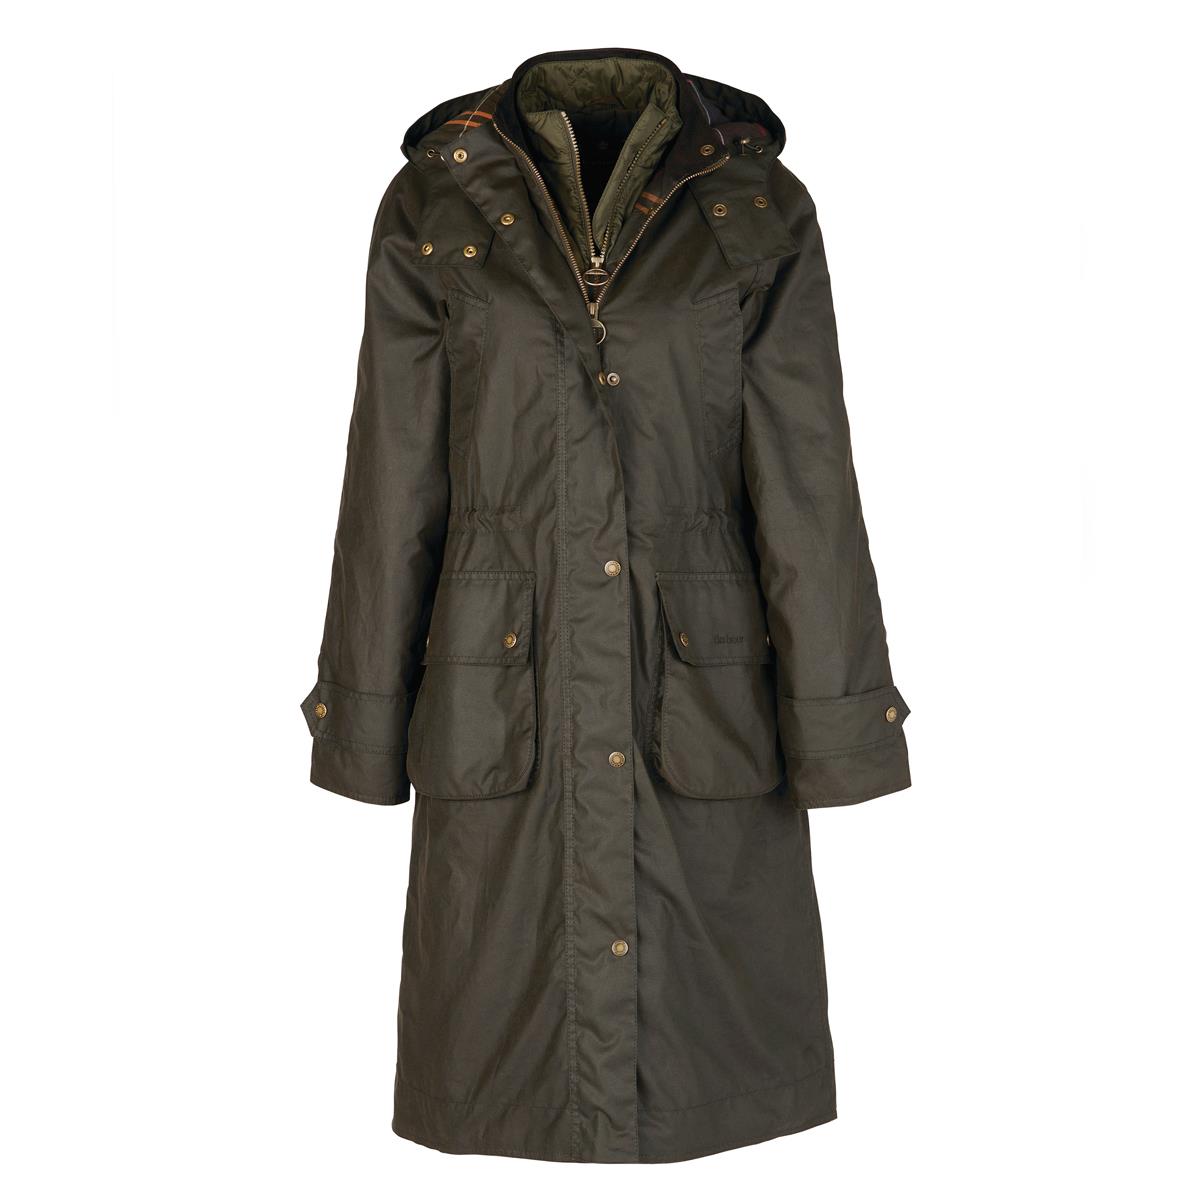 What colors & sizes for the Barbour Cannich Wax Jacket?